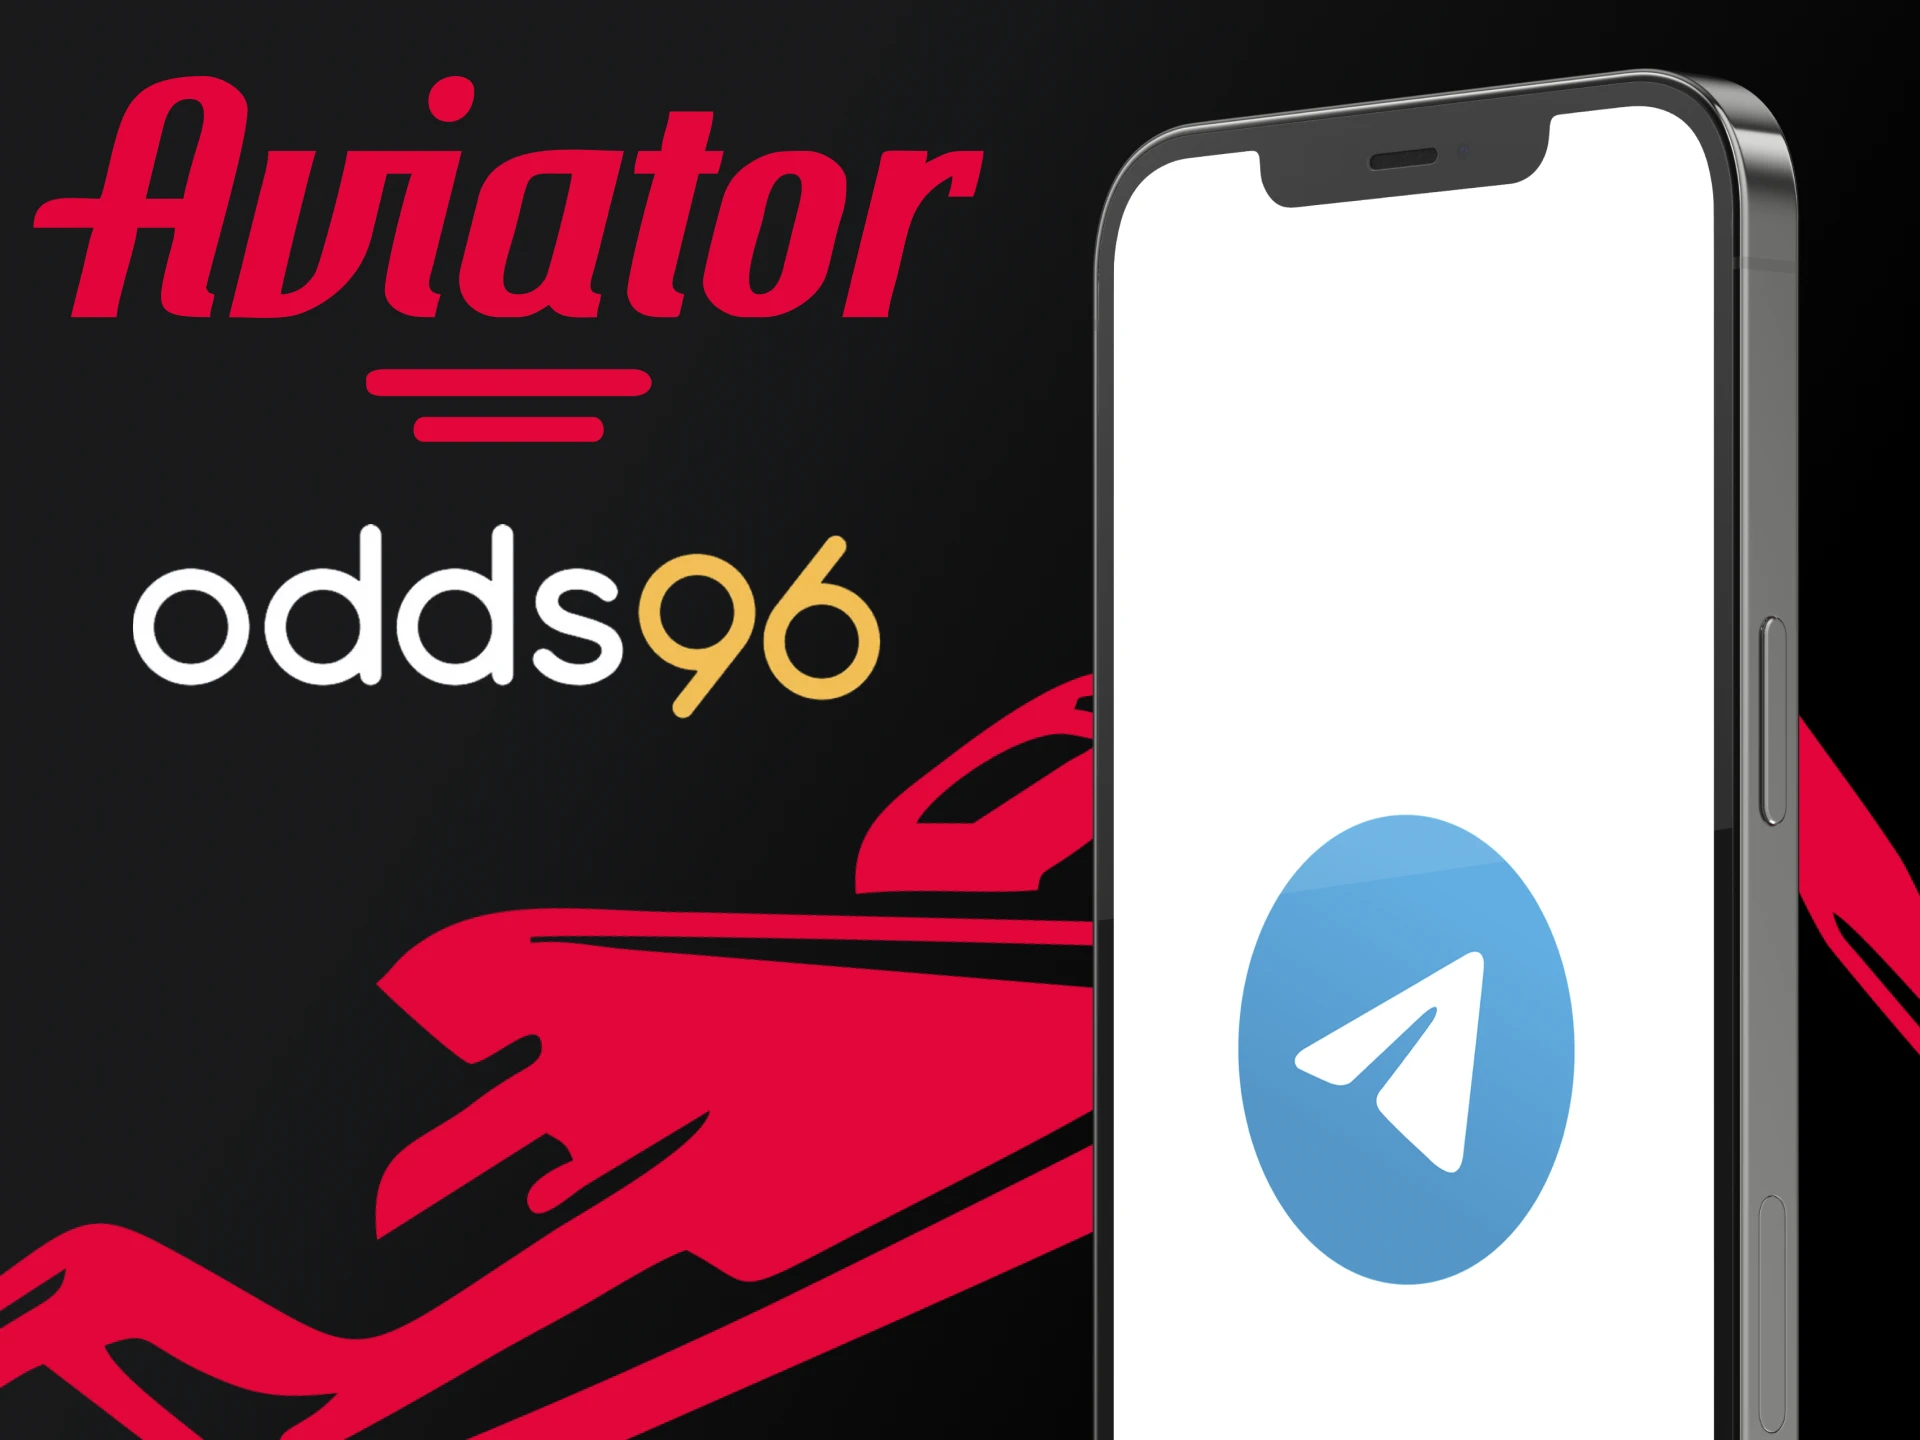 You can use the Aviator signal on odds96.